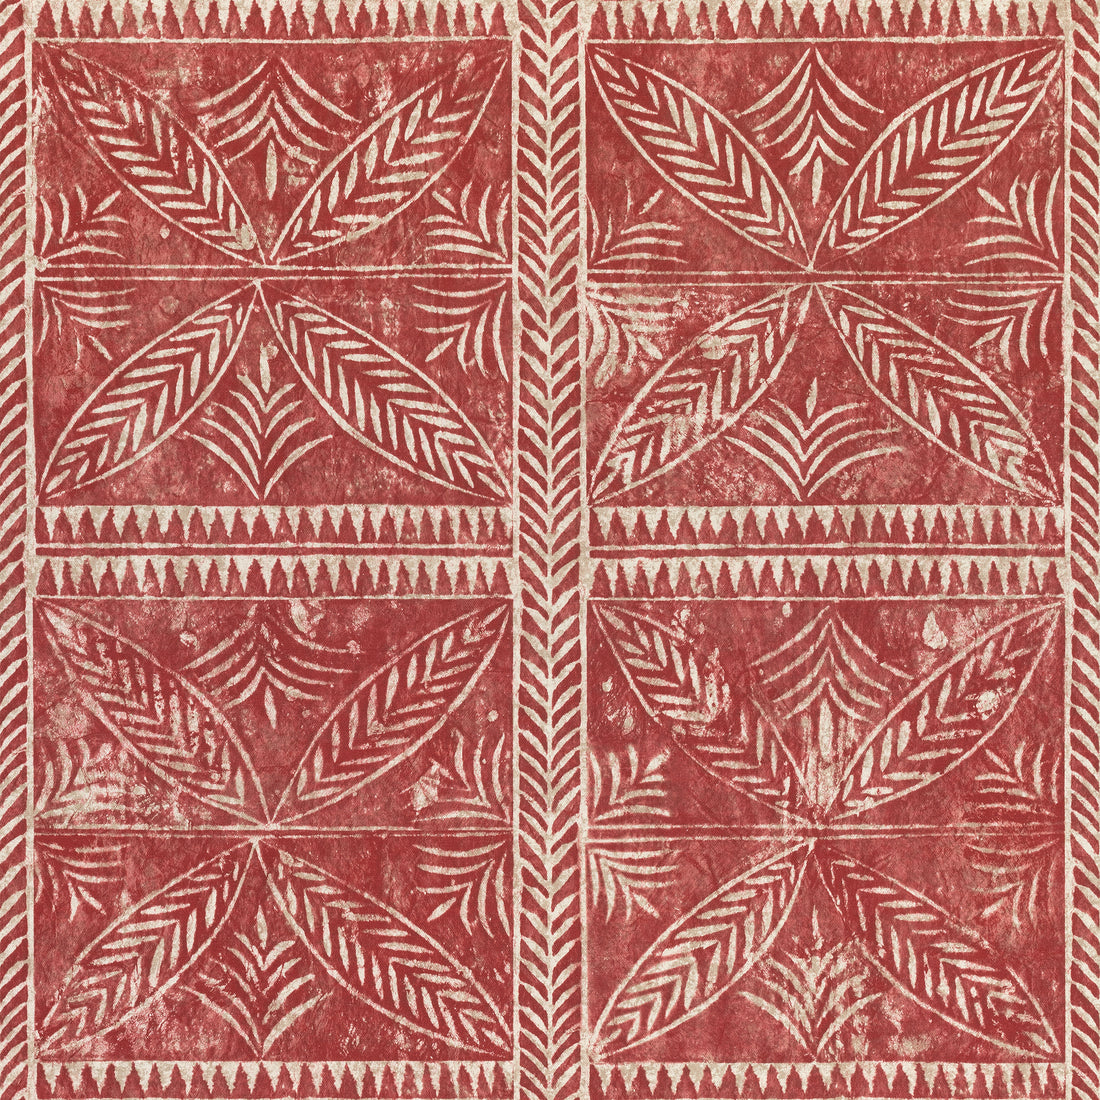 Timbuktu fabric in red color - pattern number F910257 - by Thibaut in the Colony collection